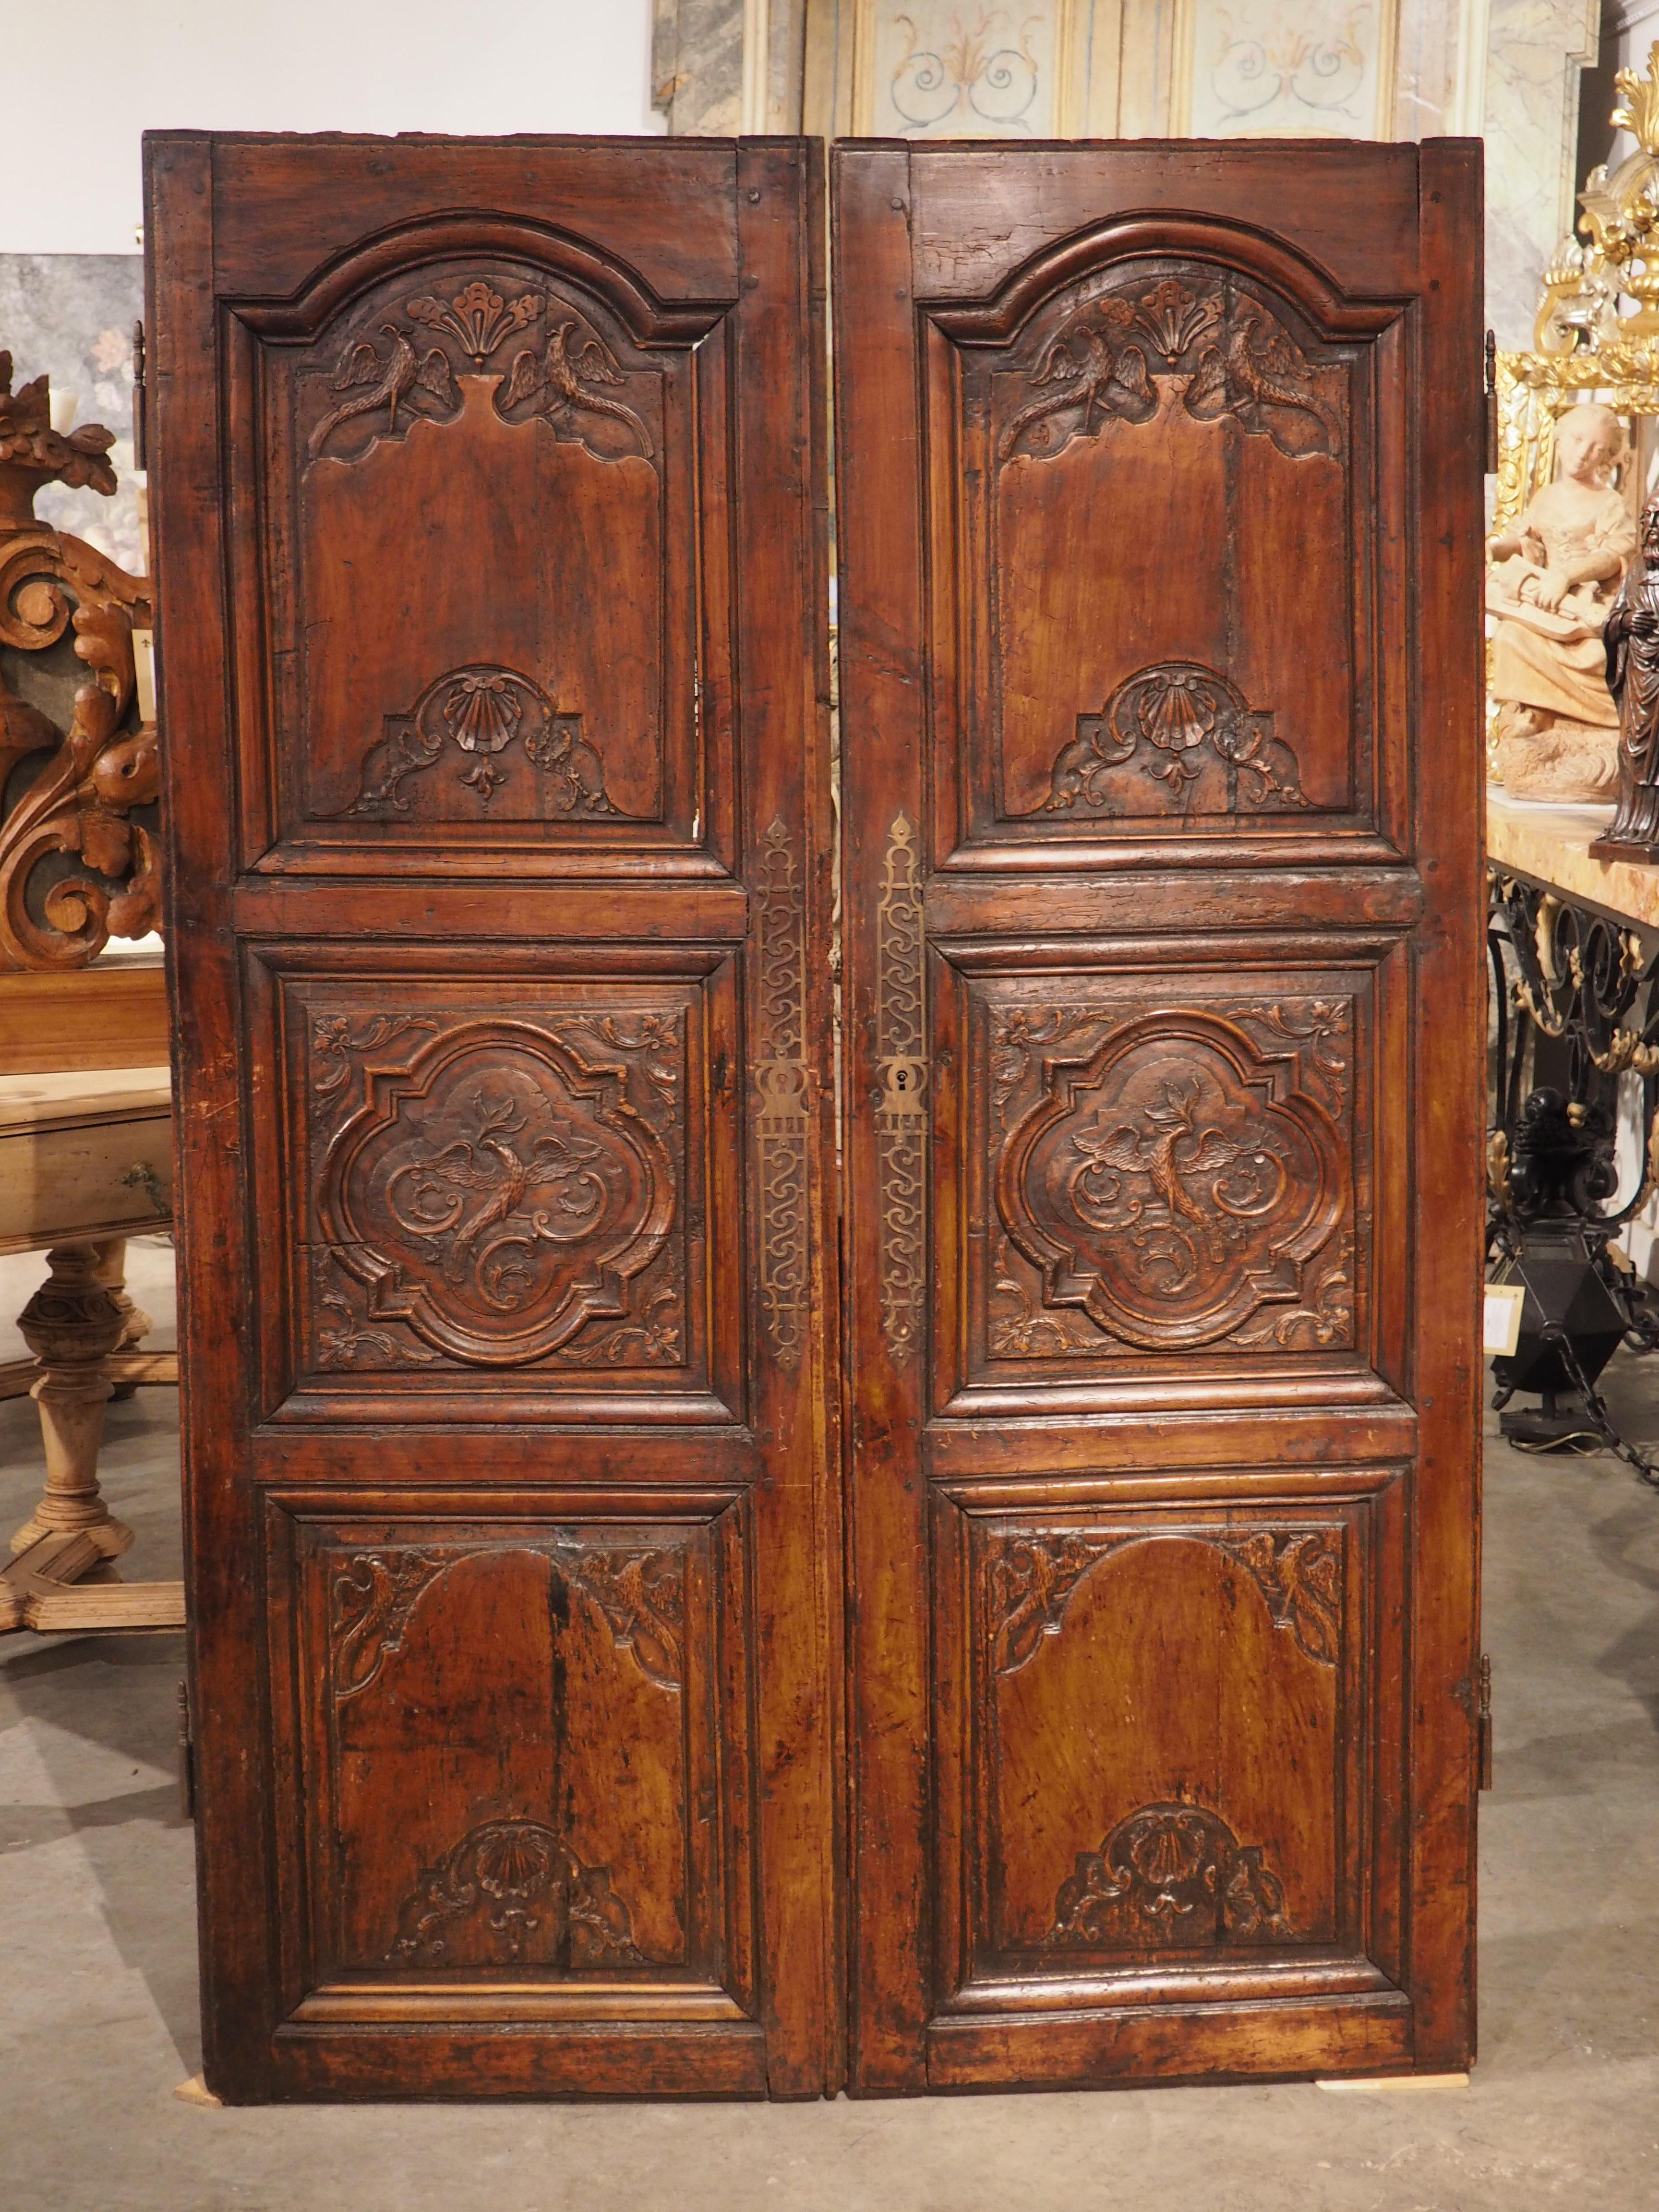 Pair of Antique Cherry Wood Armoire Doors from Rennes, France, Circa 1720 7